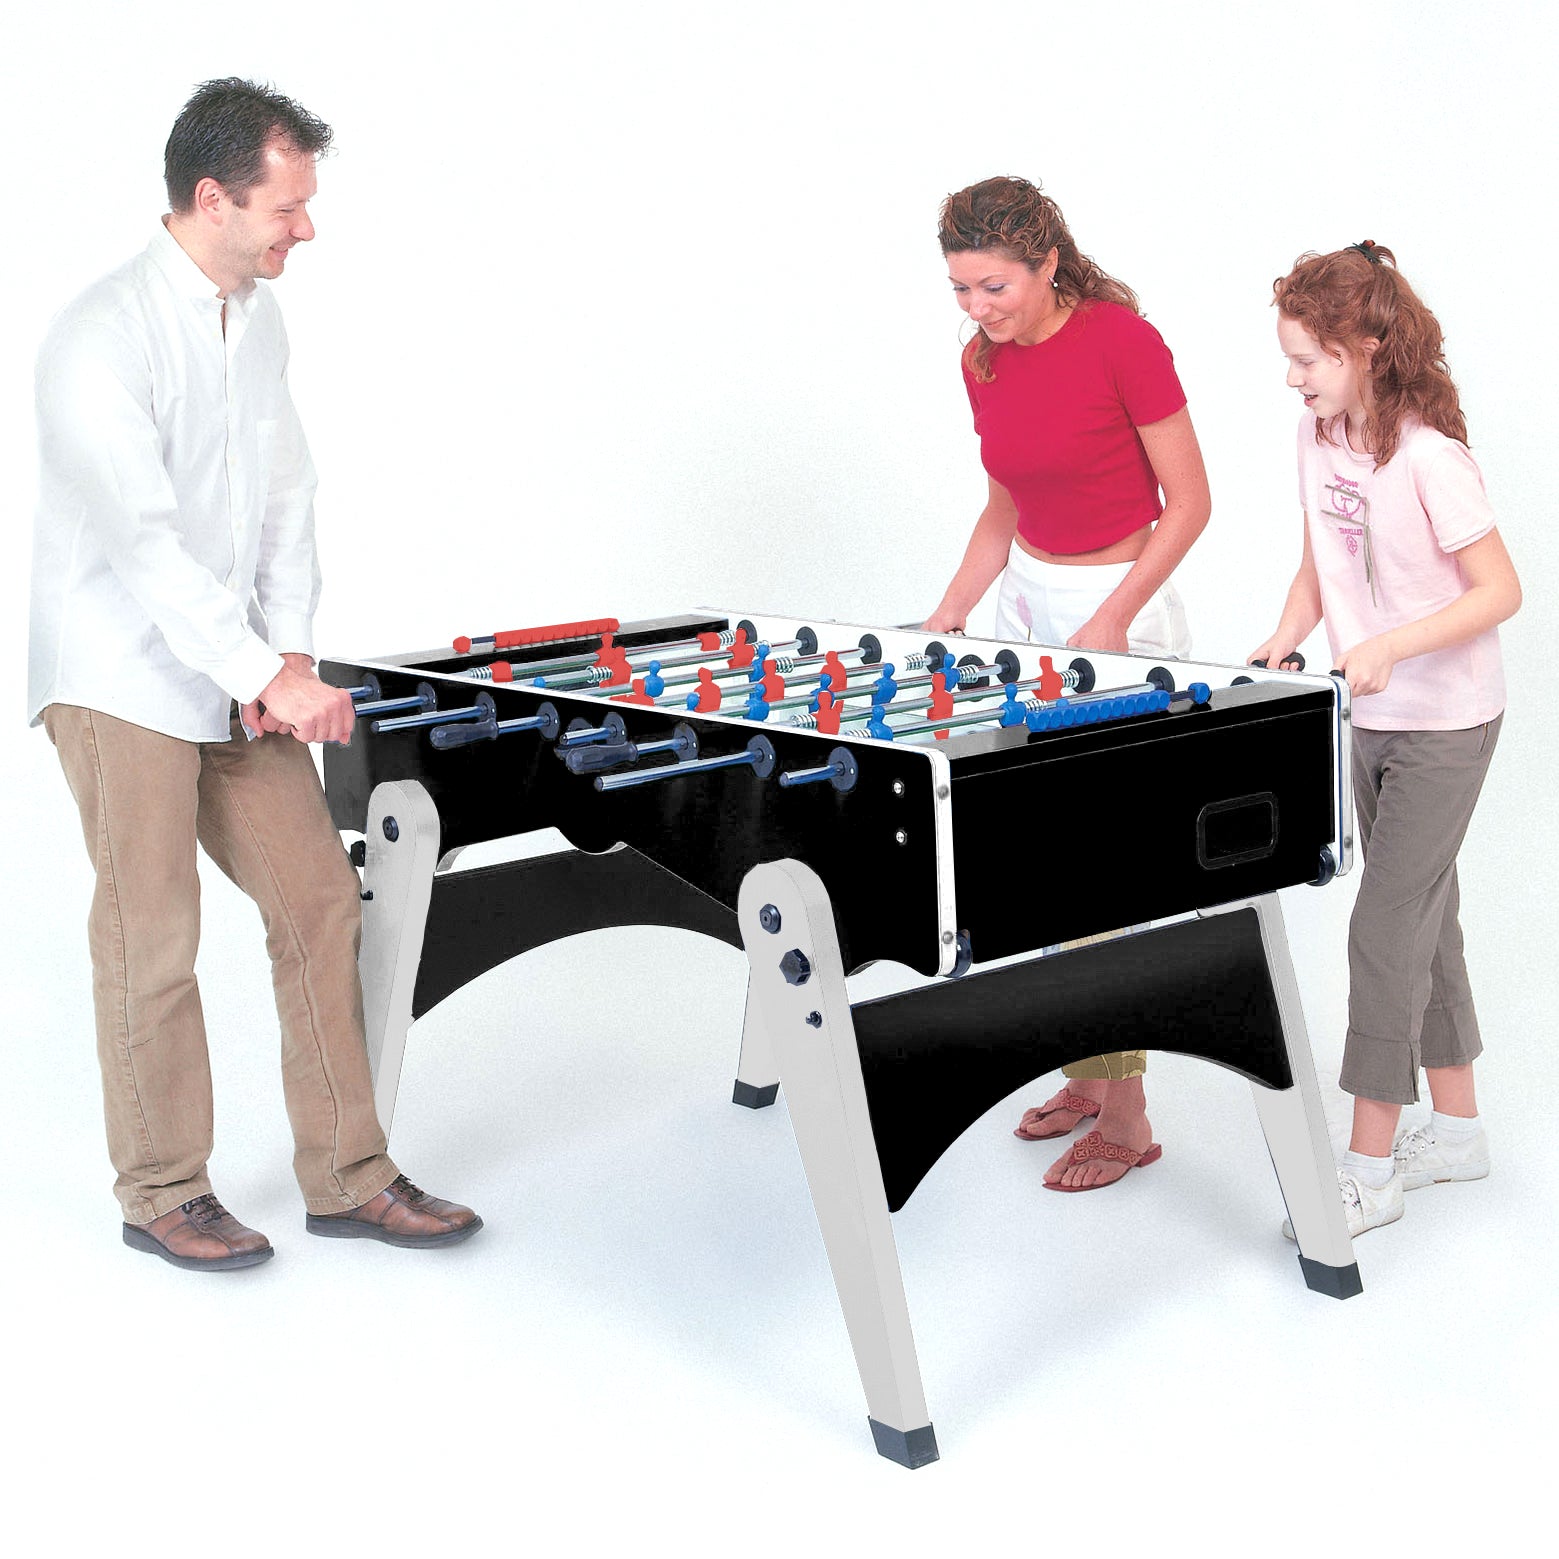 Family playing on the FOLDY Evolution Indoor Foosball Table